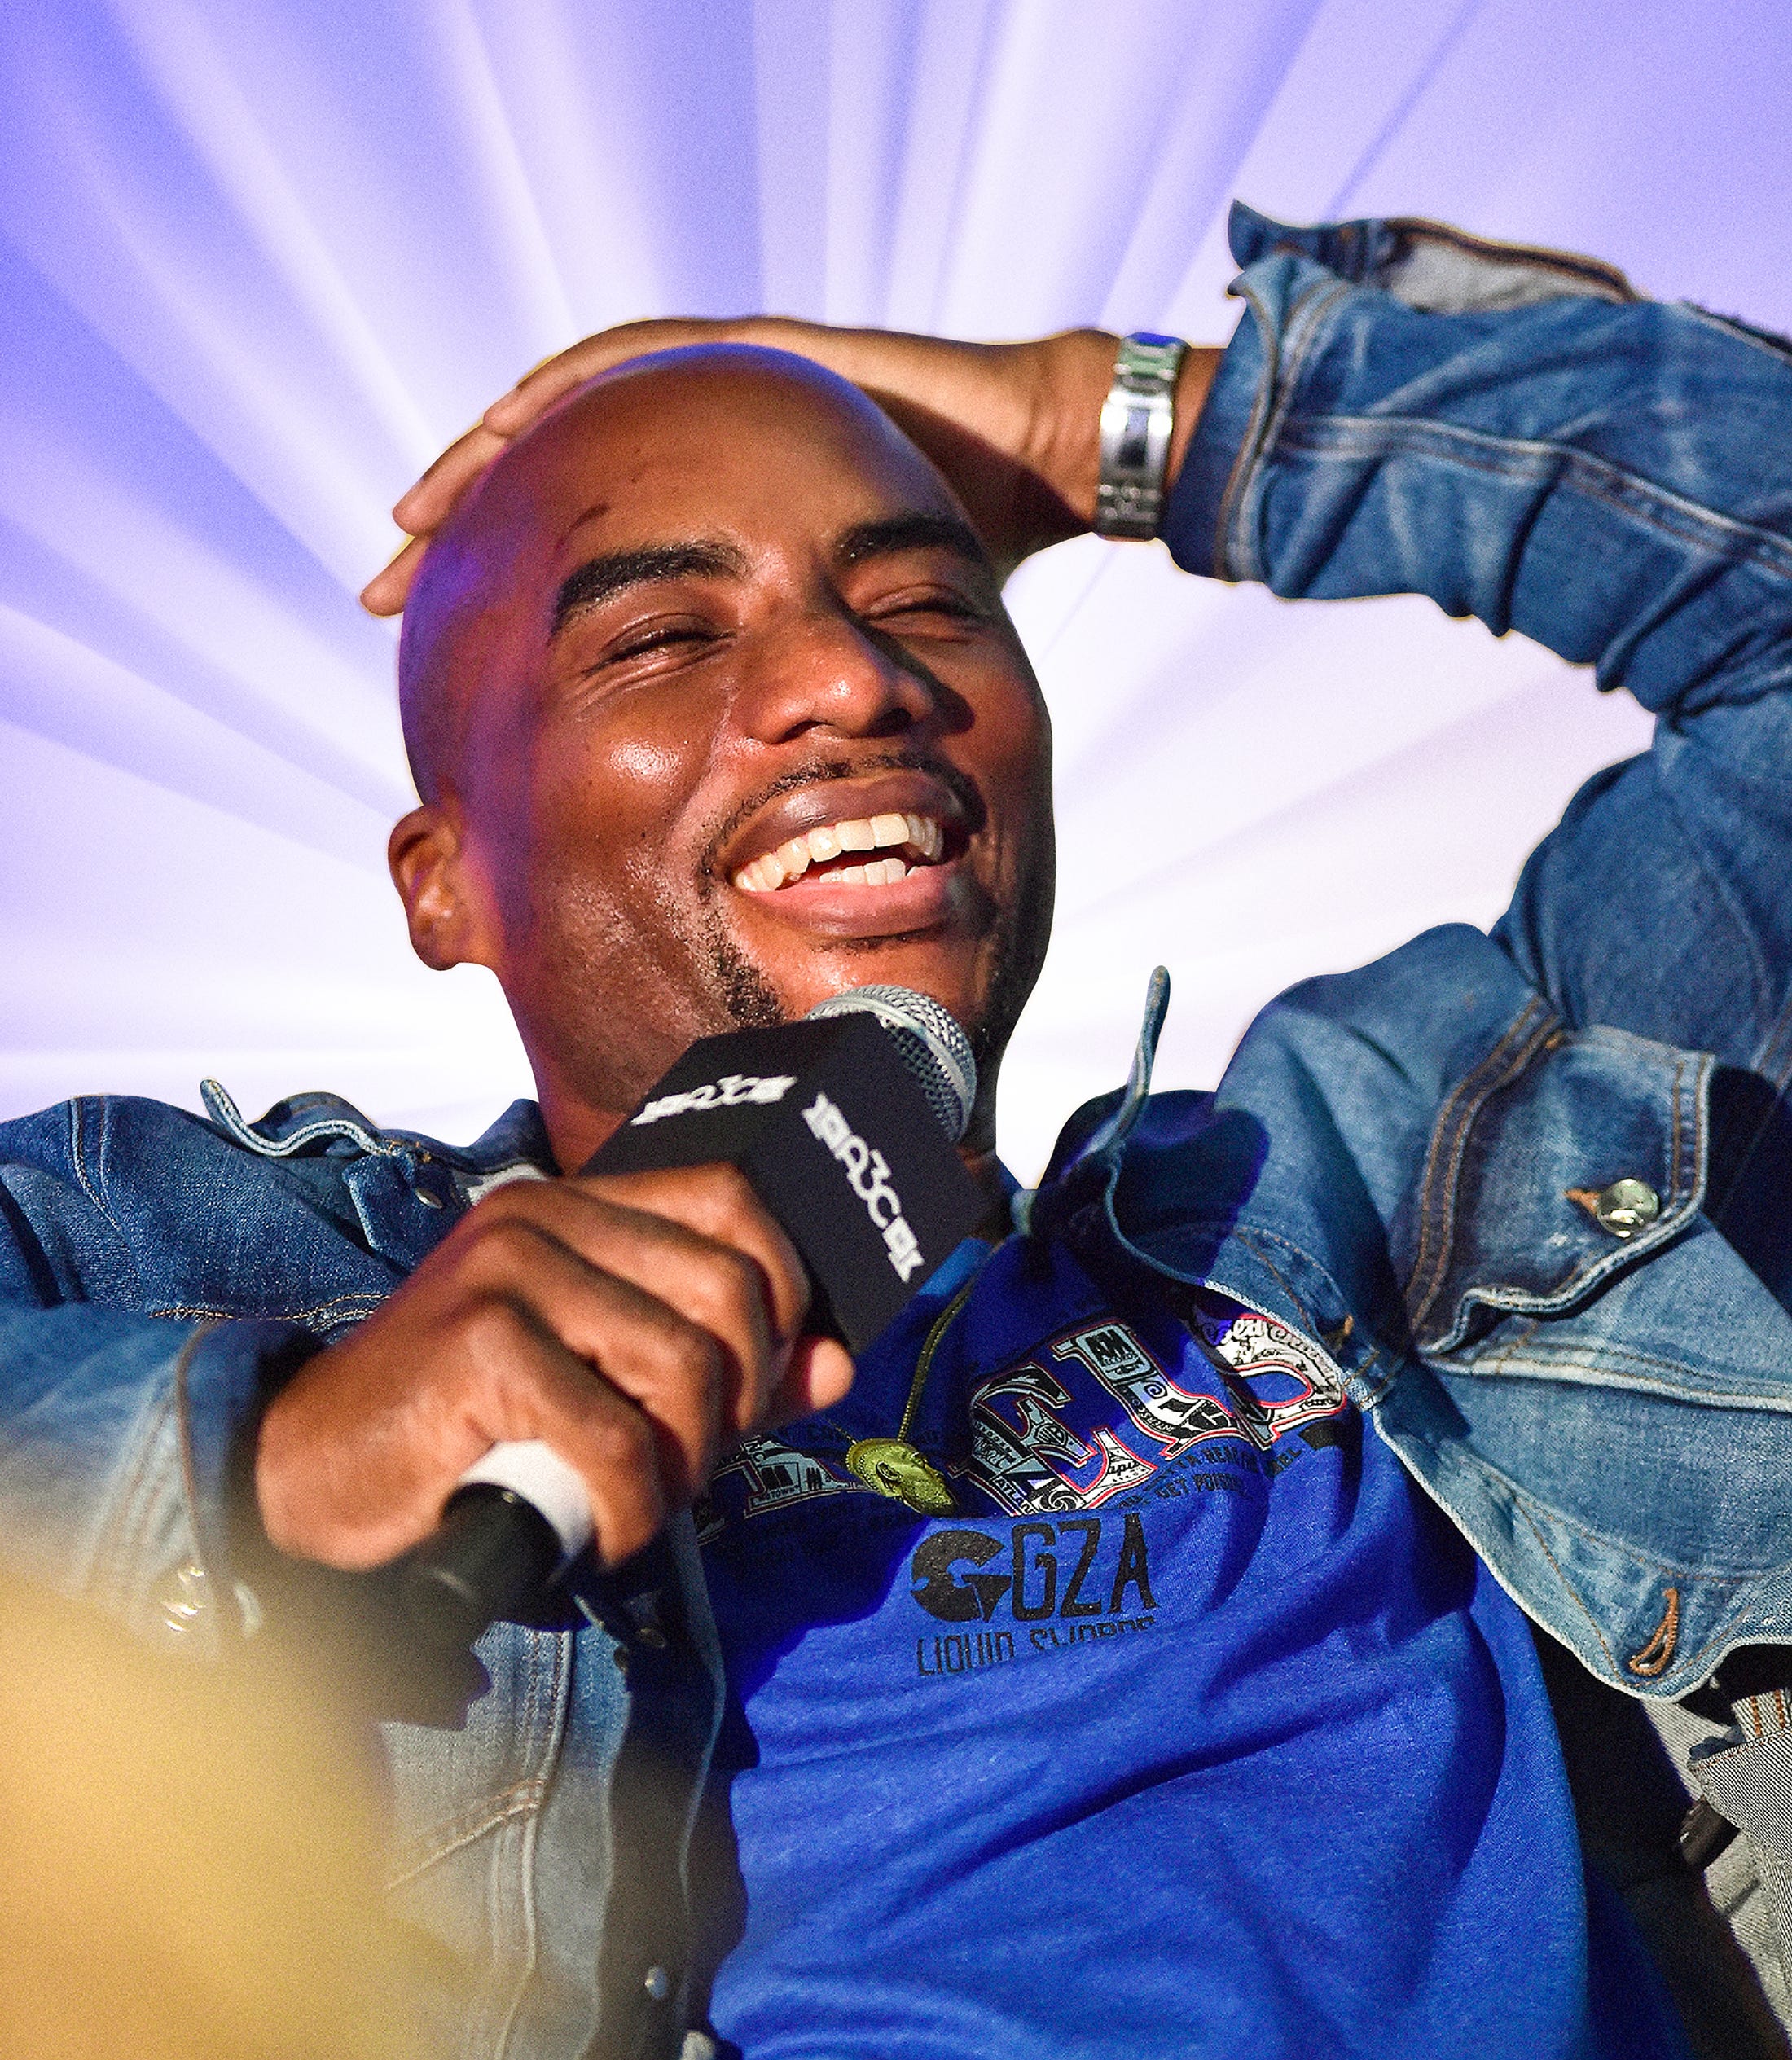 Charlamagne Tha God laughing during an interview with a golden light radiating from behind him.